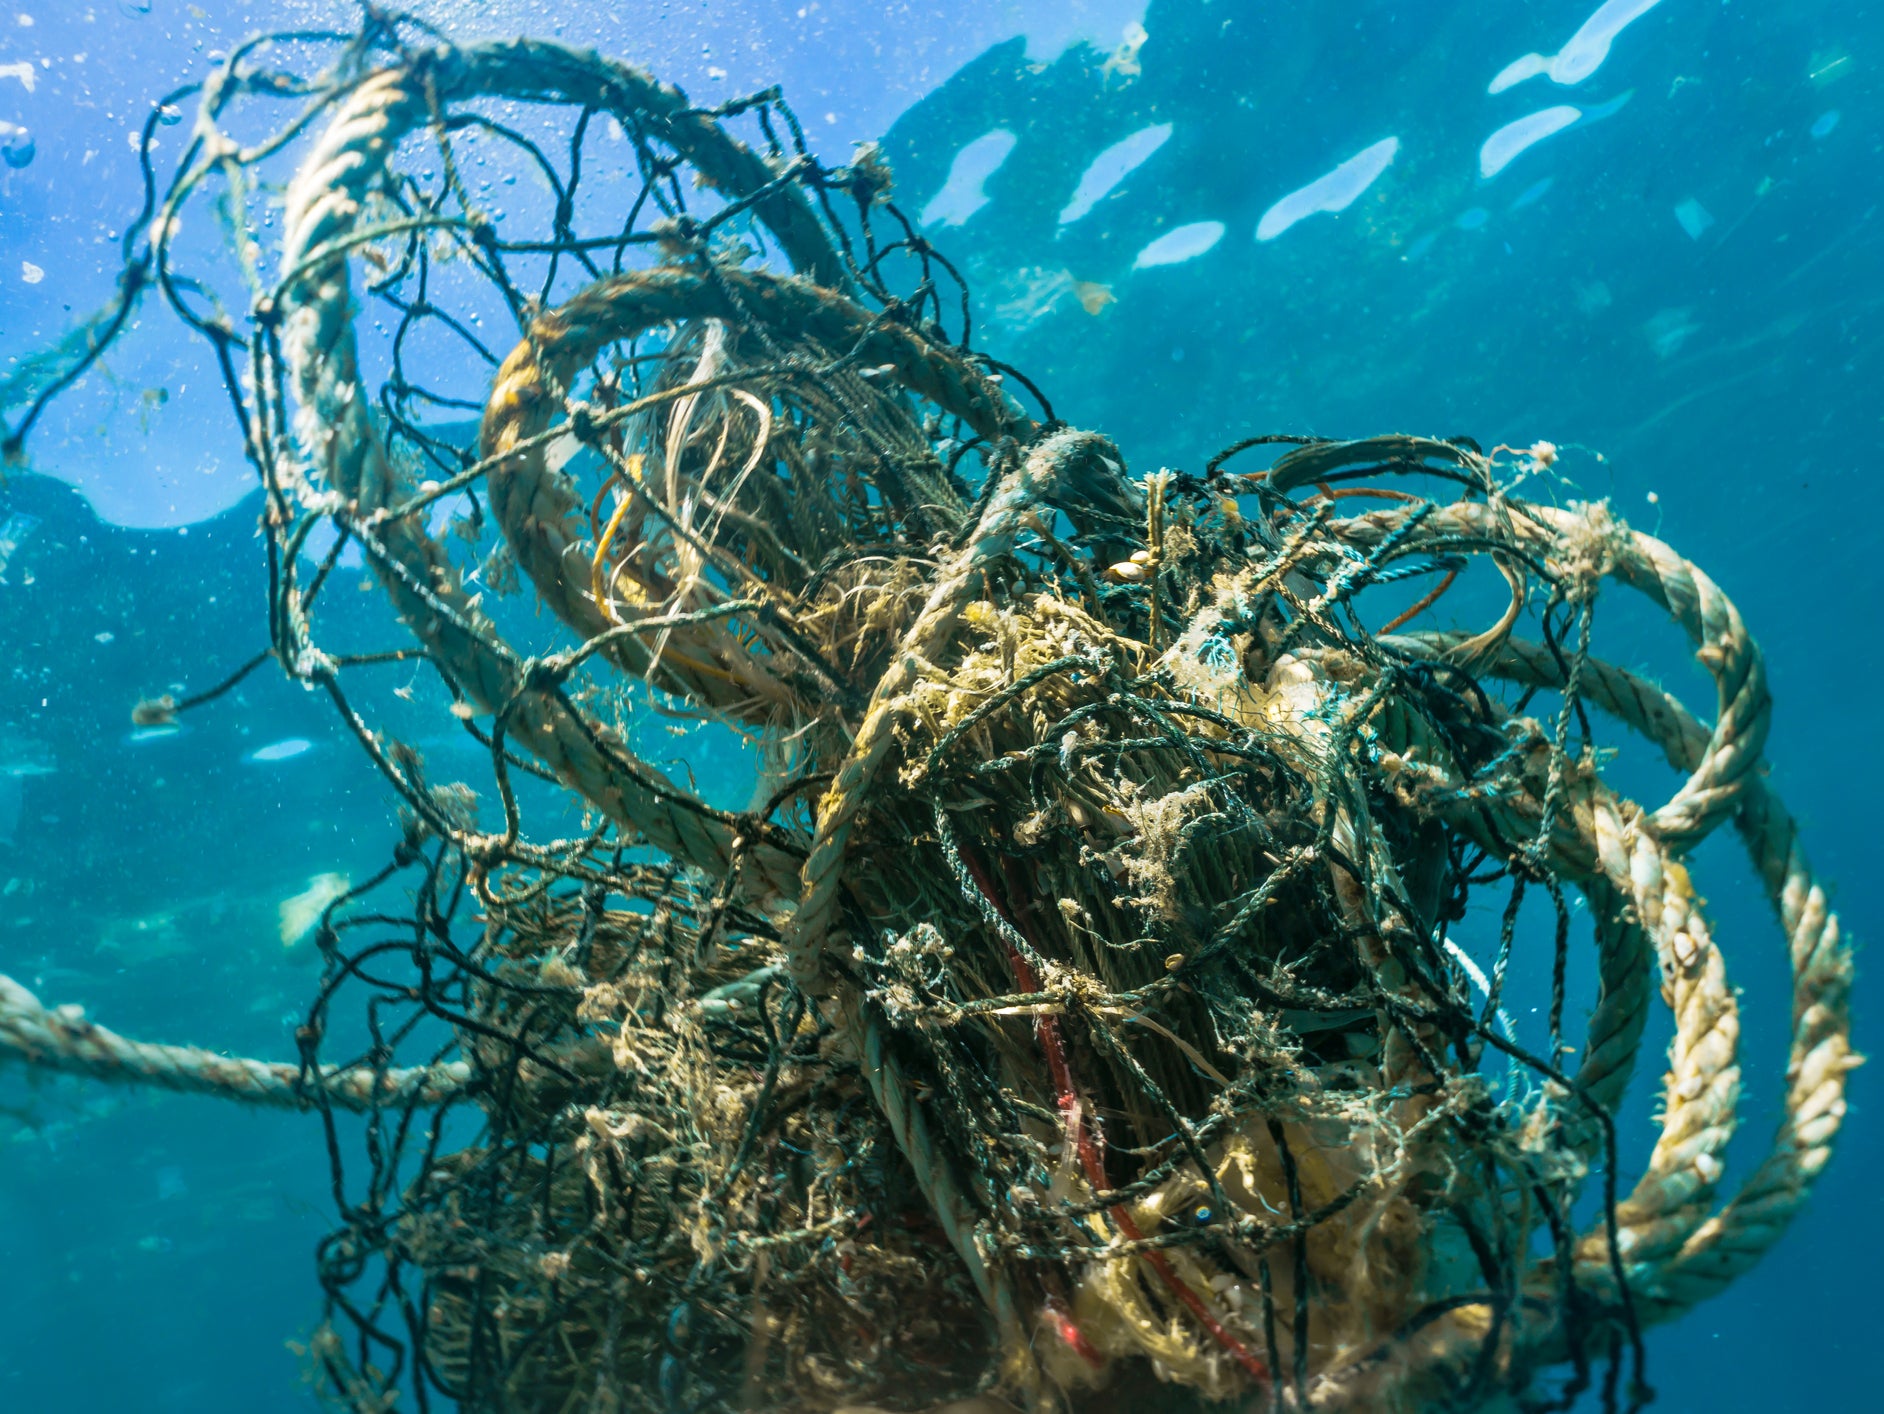 Up to one million tonnes of 'deadly' fishing gear left in ocean